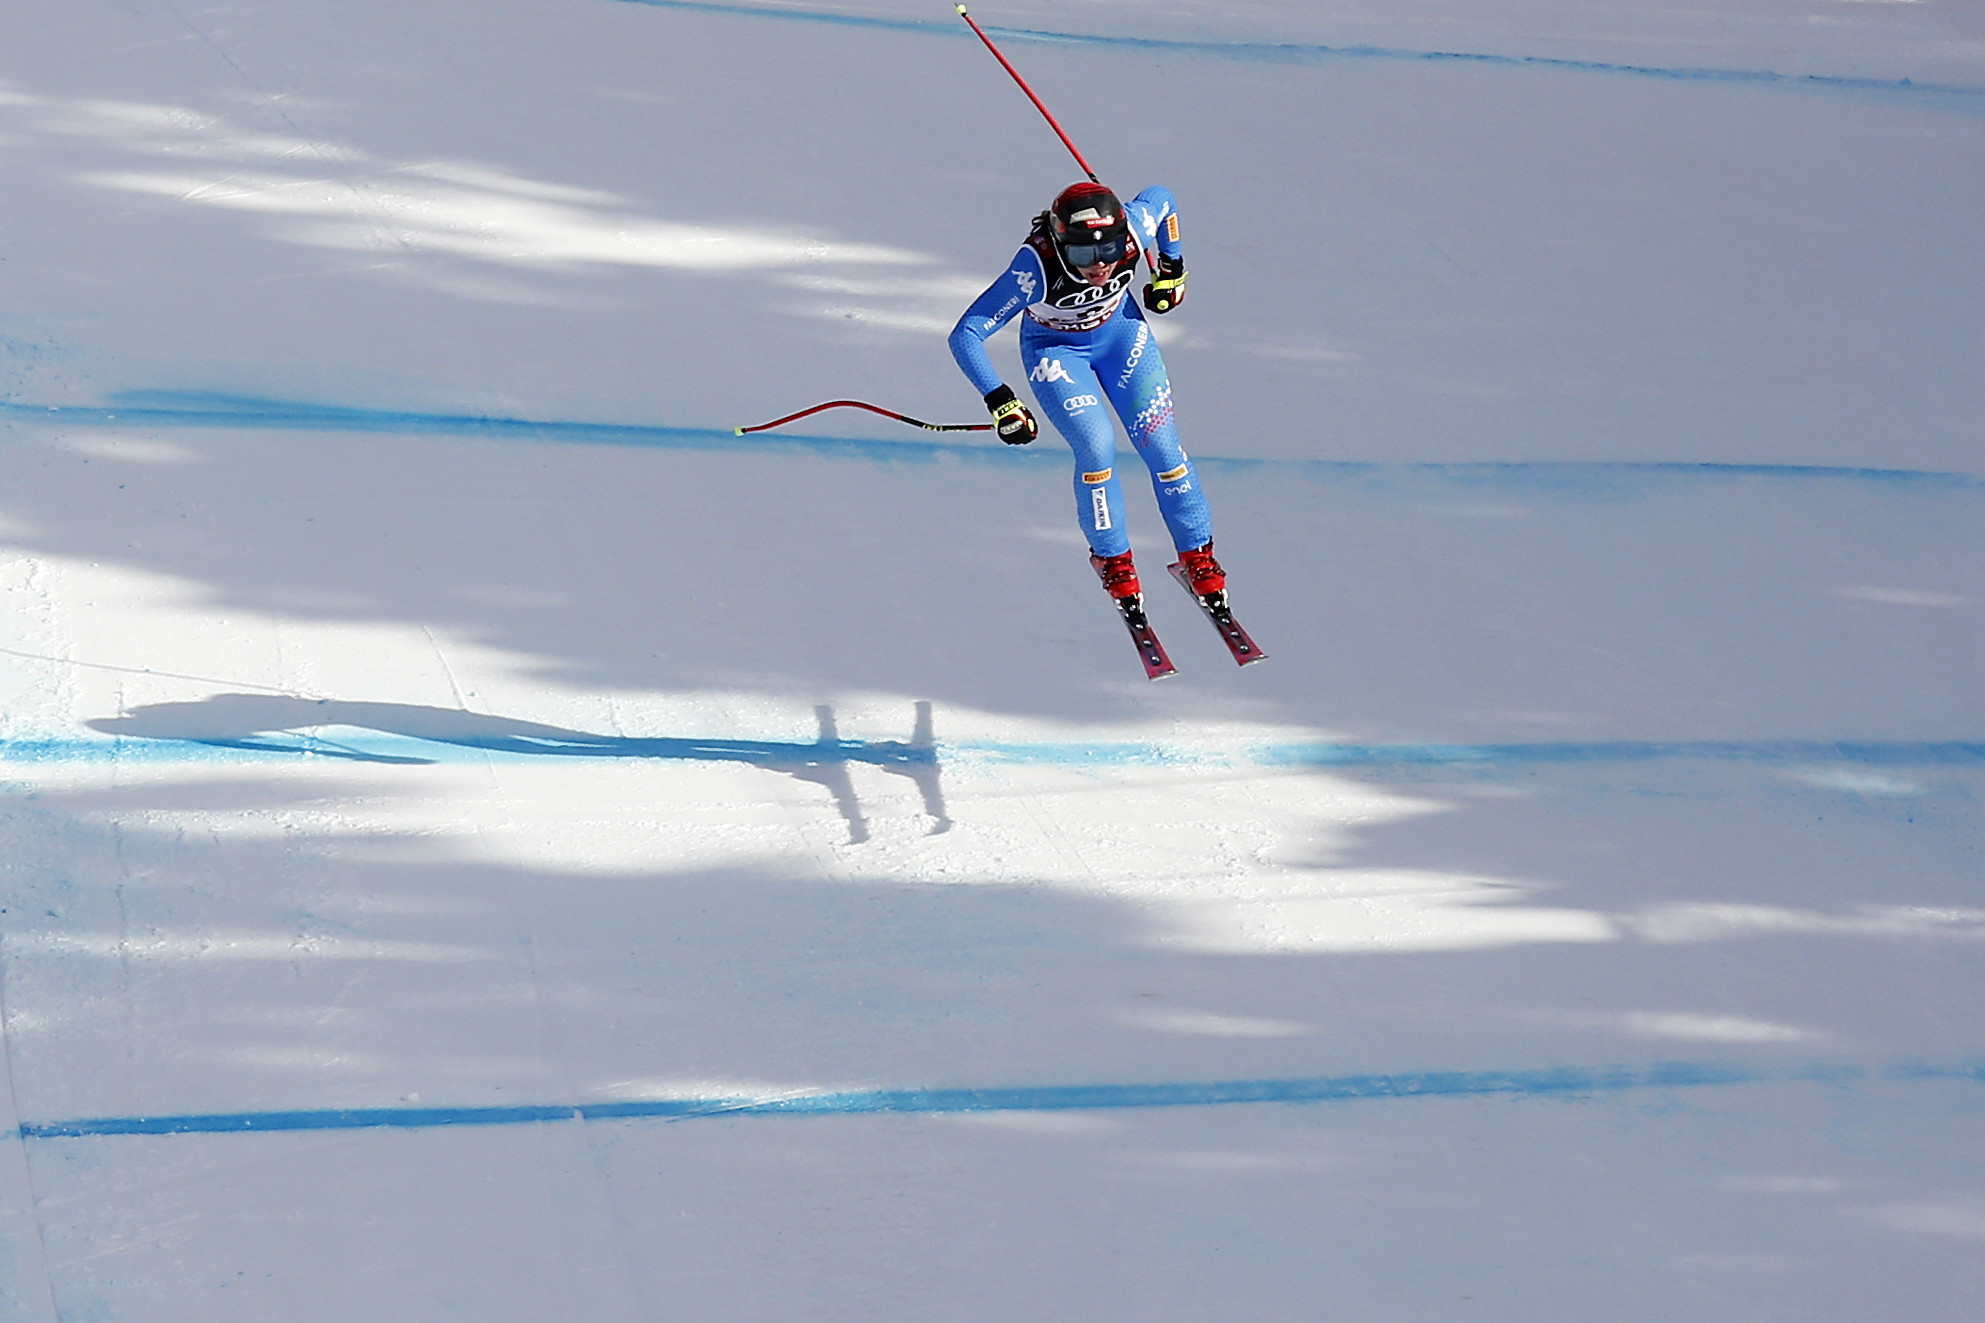 Downhill competition was the focus for the second successive day ©Getty Images